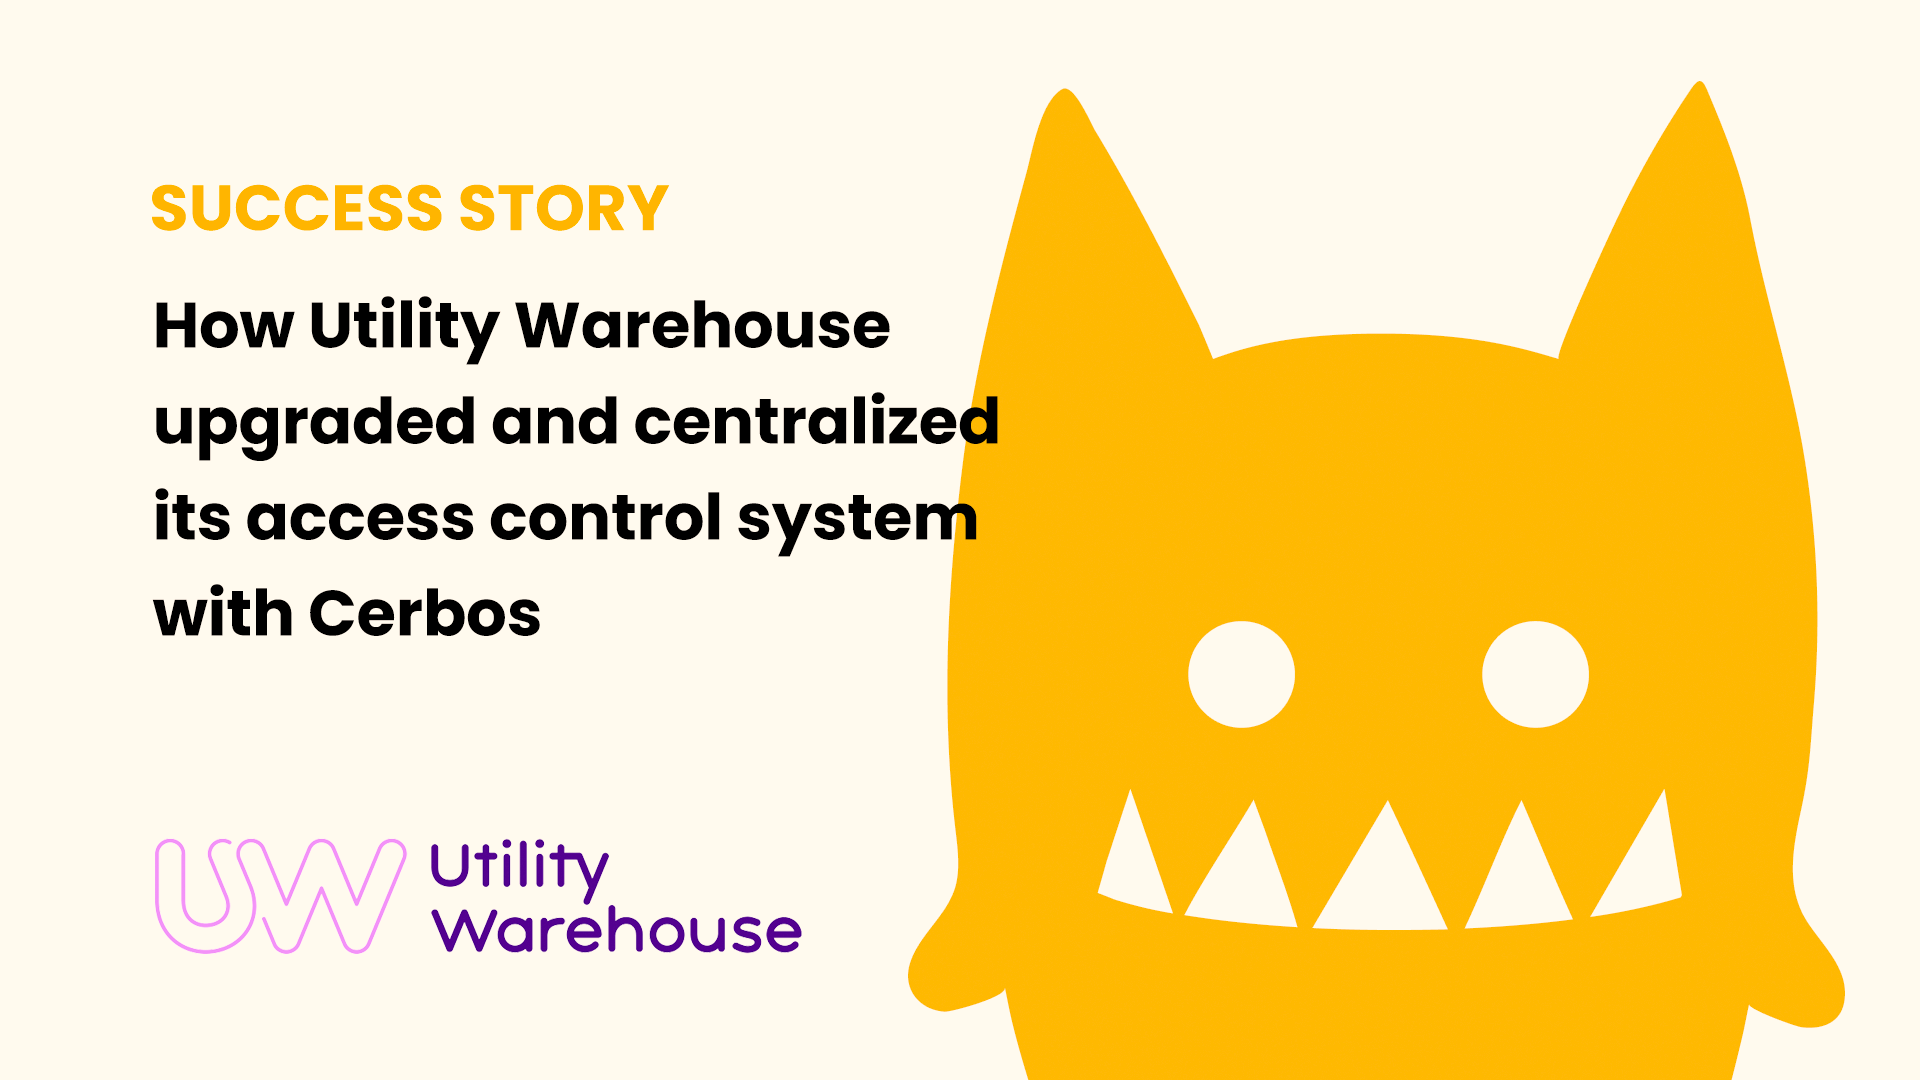 How Utility Warehouse upgraded and centralized its access control system with Cerbos